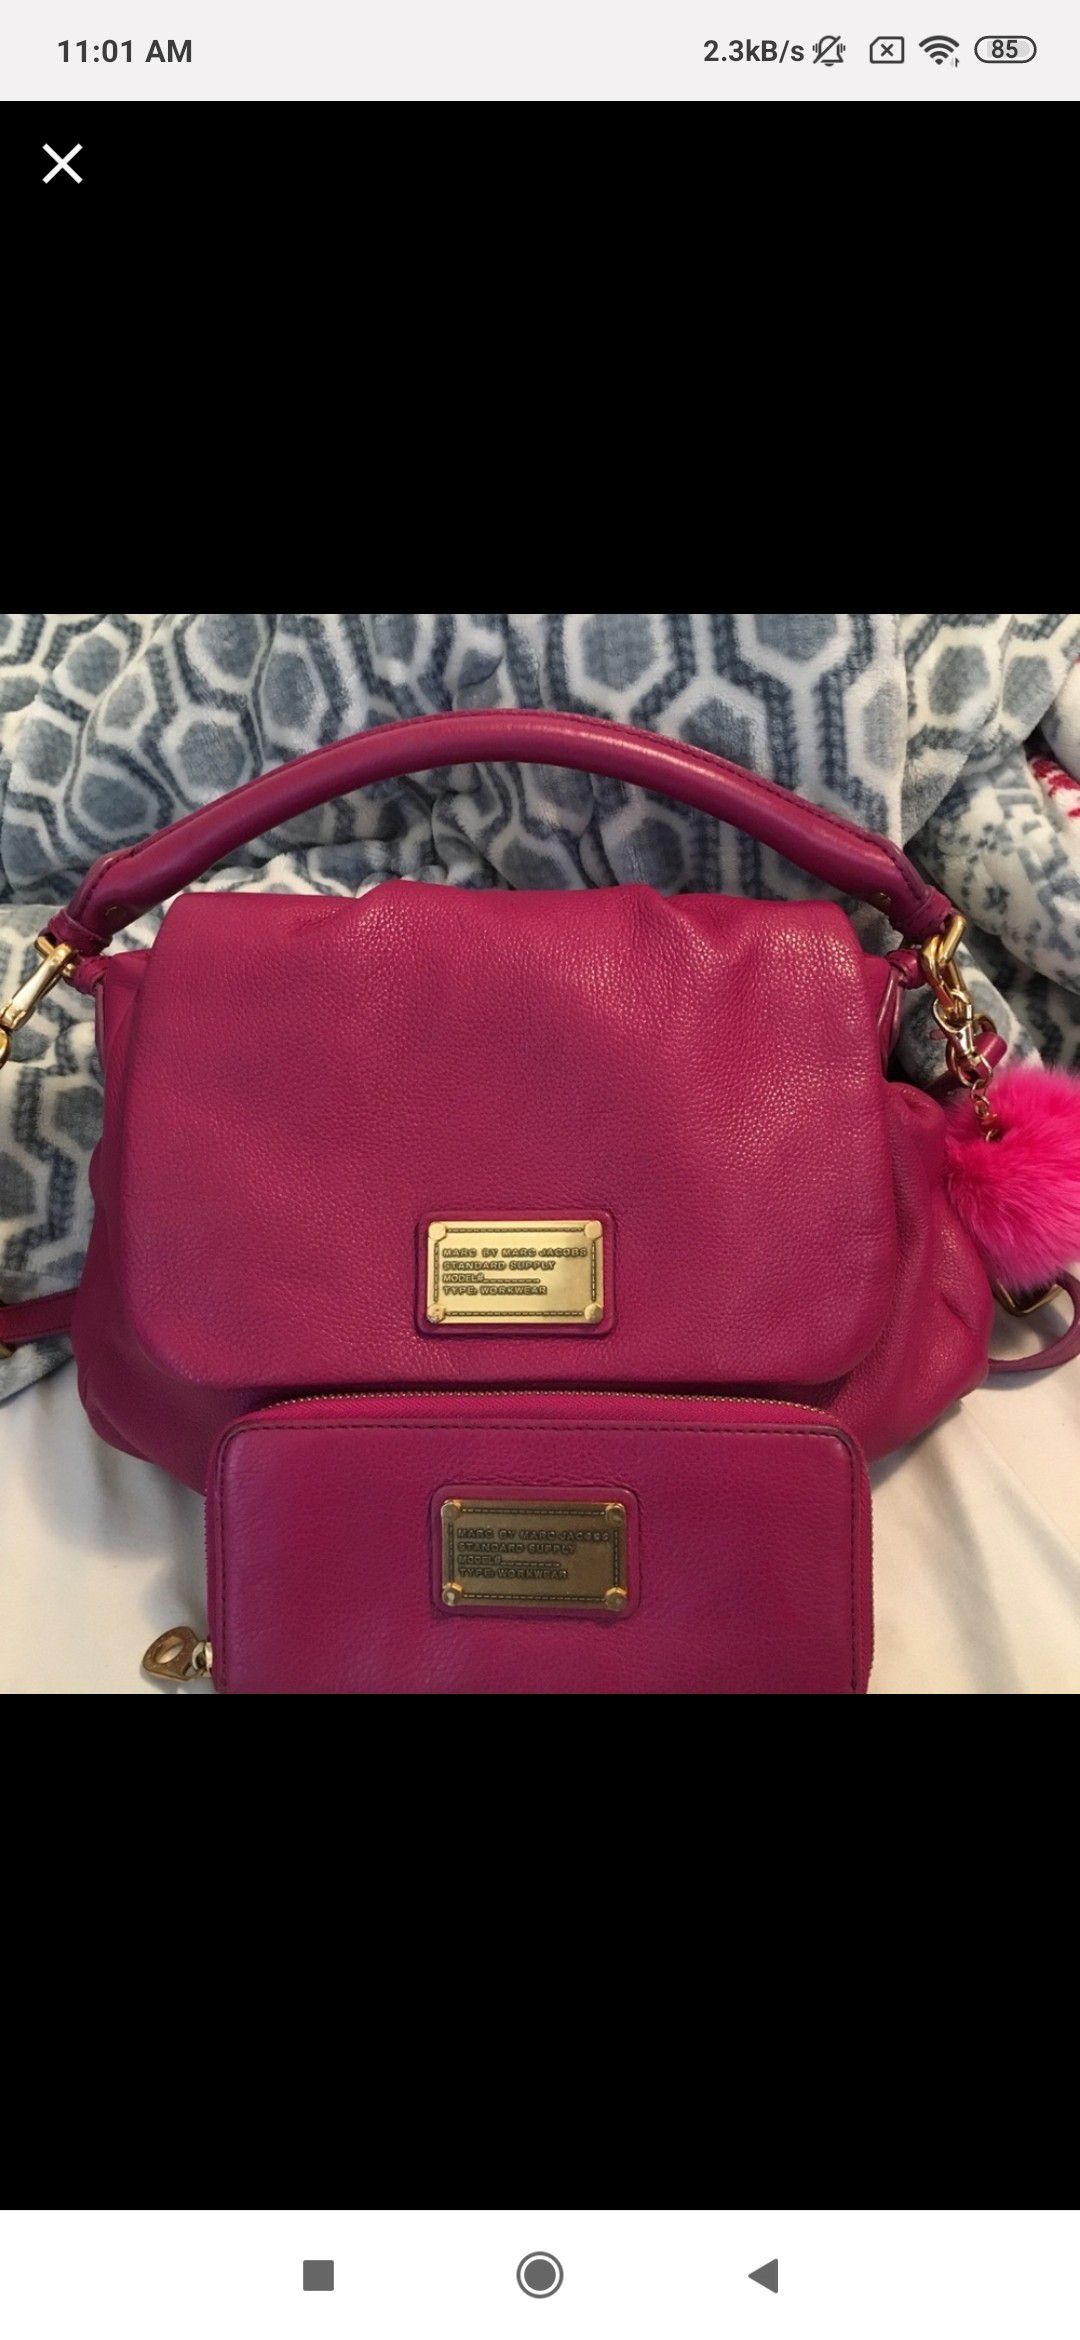 Marc by marc jacobs bag and wallet